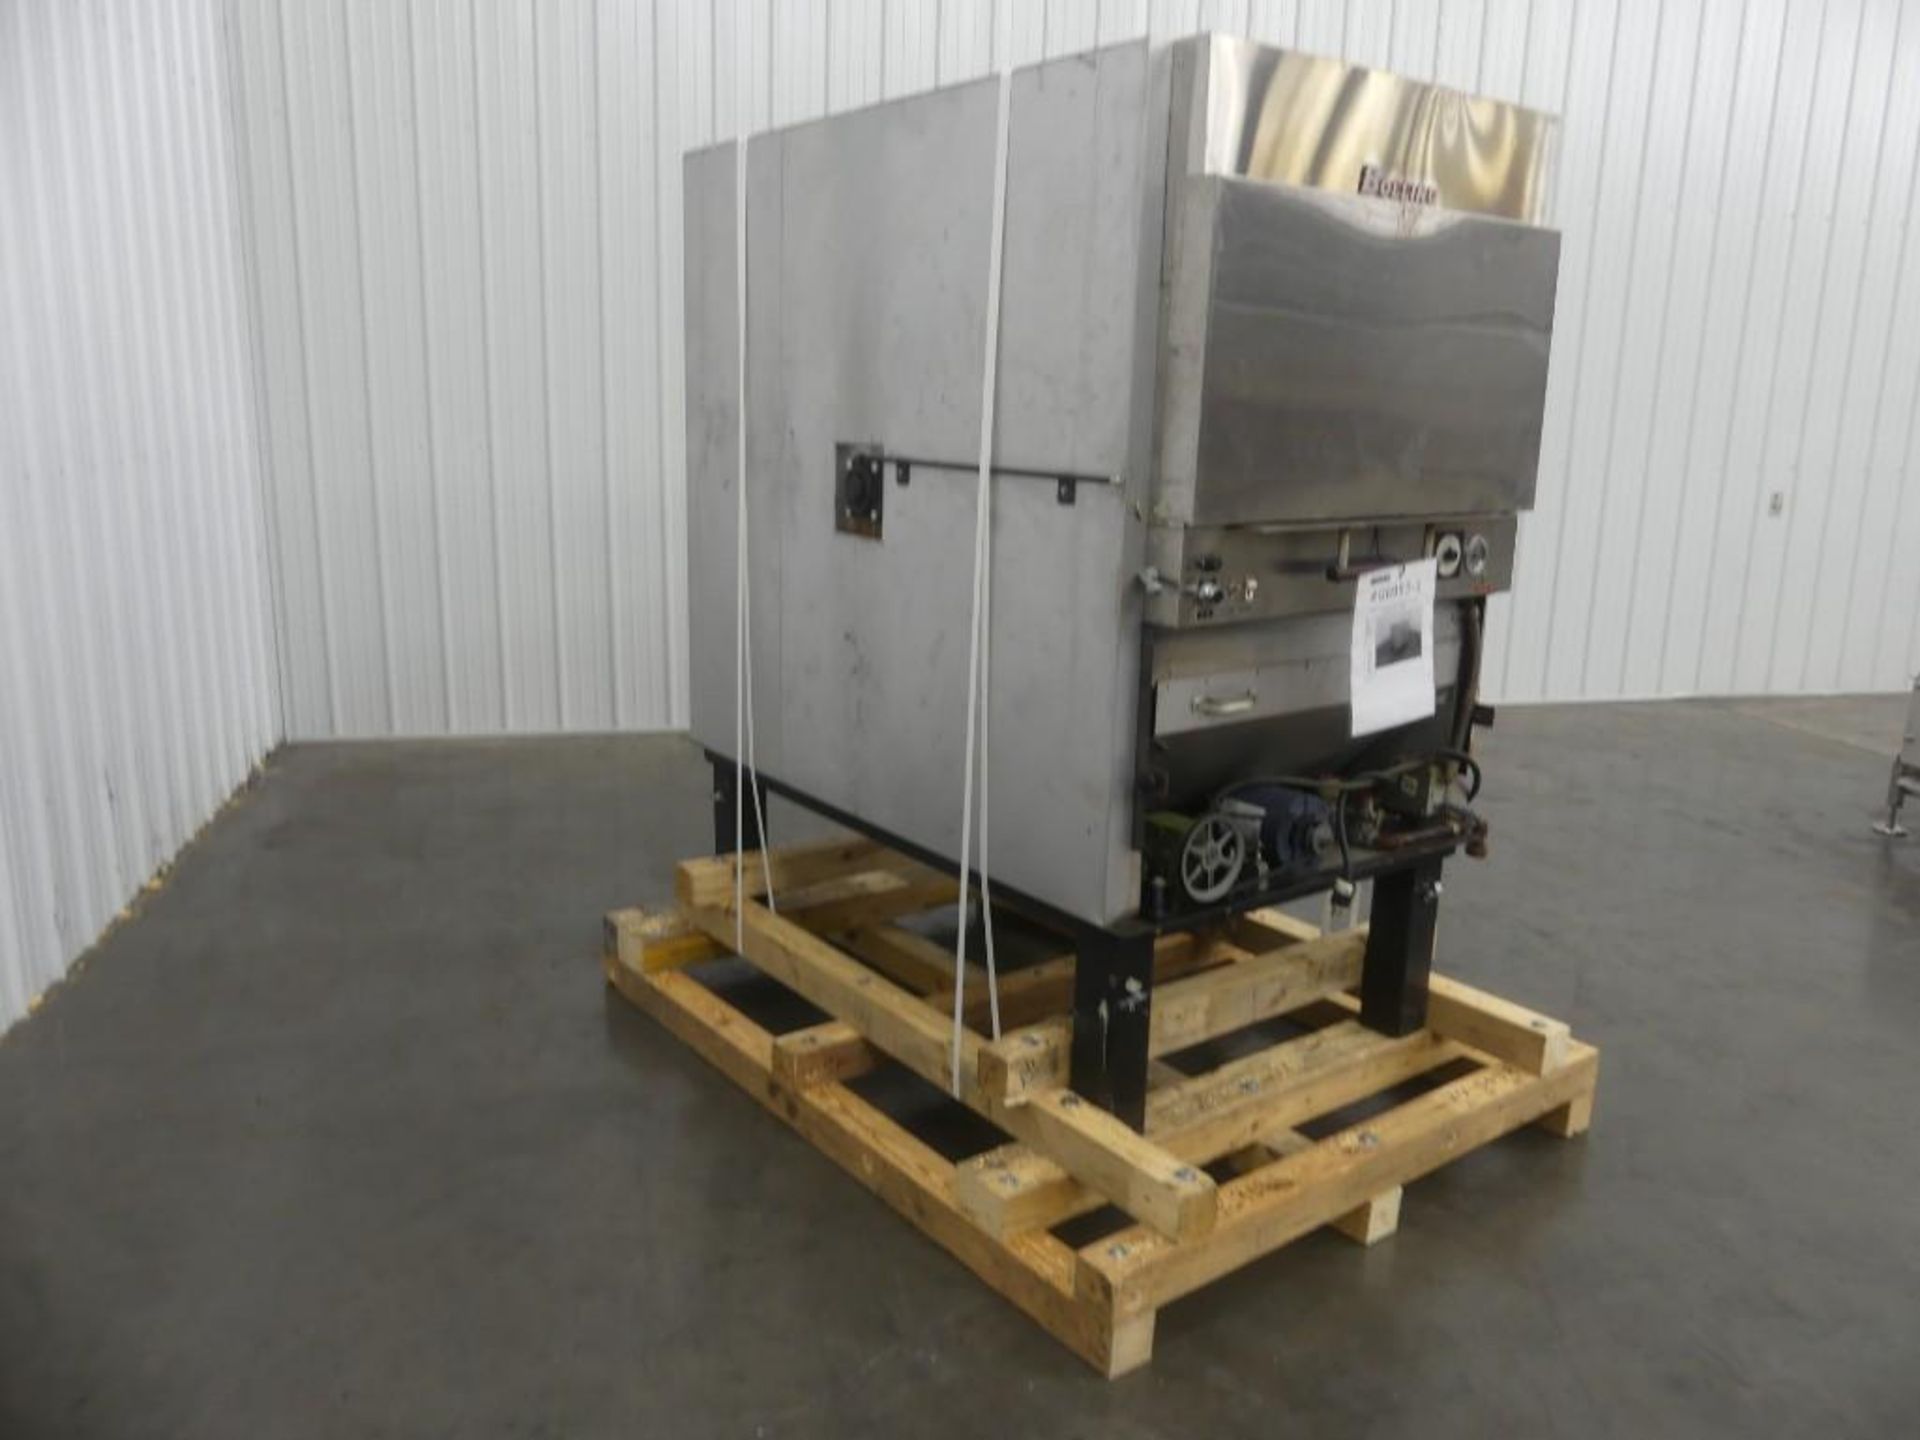 Bolling 500 M 5 Tray Revolving Rack SS Oven - Image 2 of 11